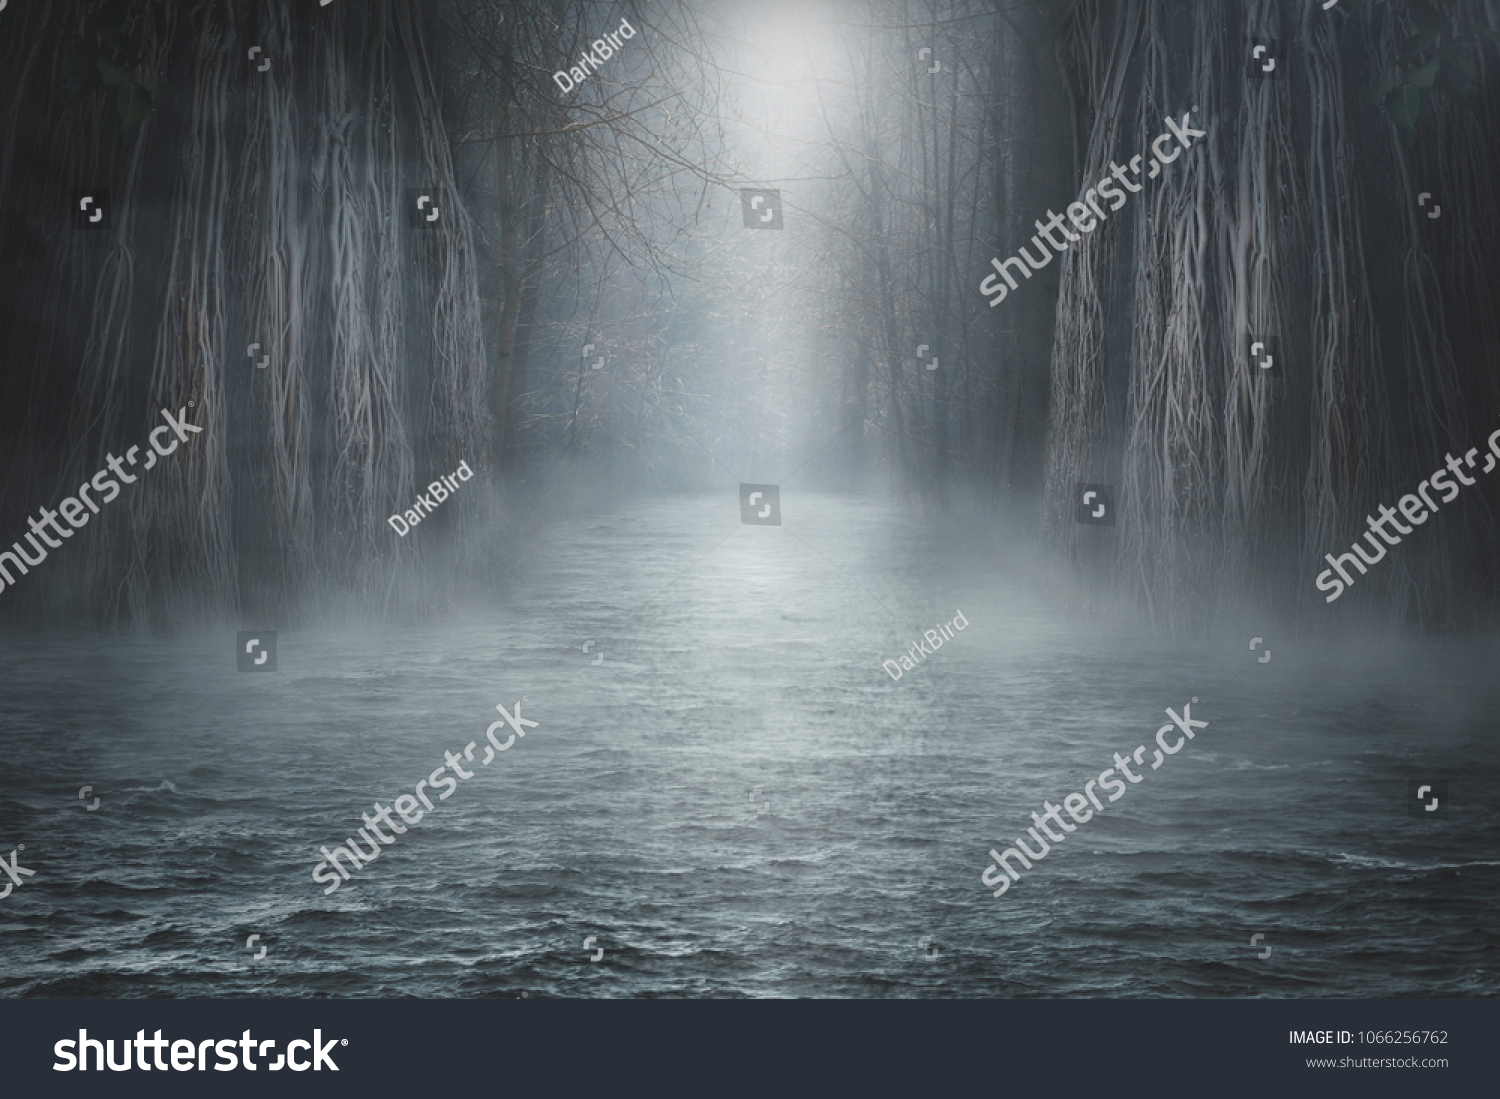 Dark landscape with magic forest, sea and magic light. Halloween background #1066256762